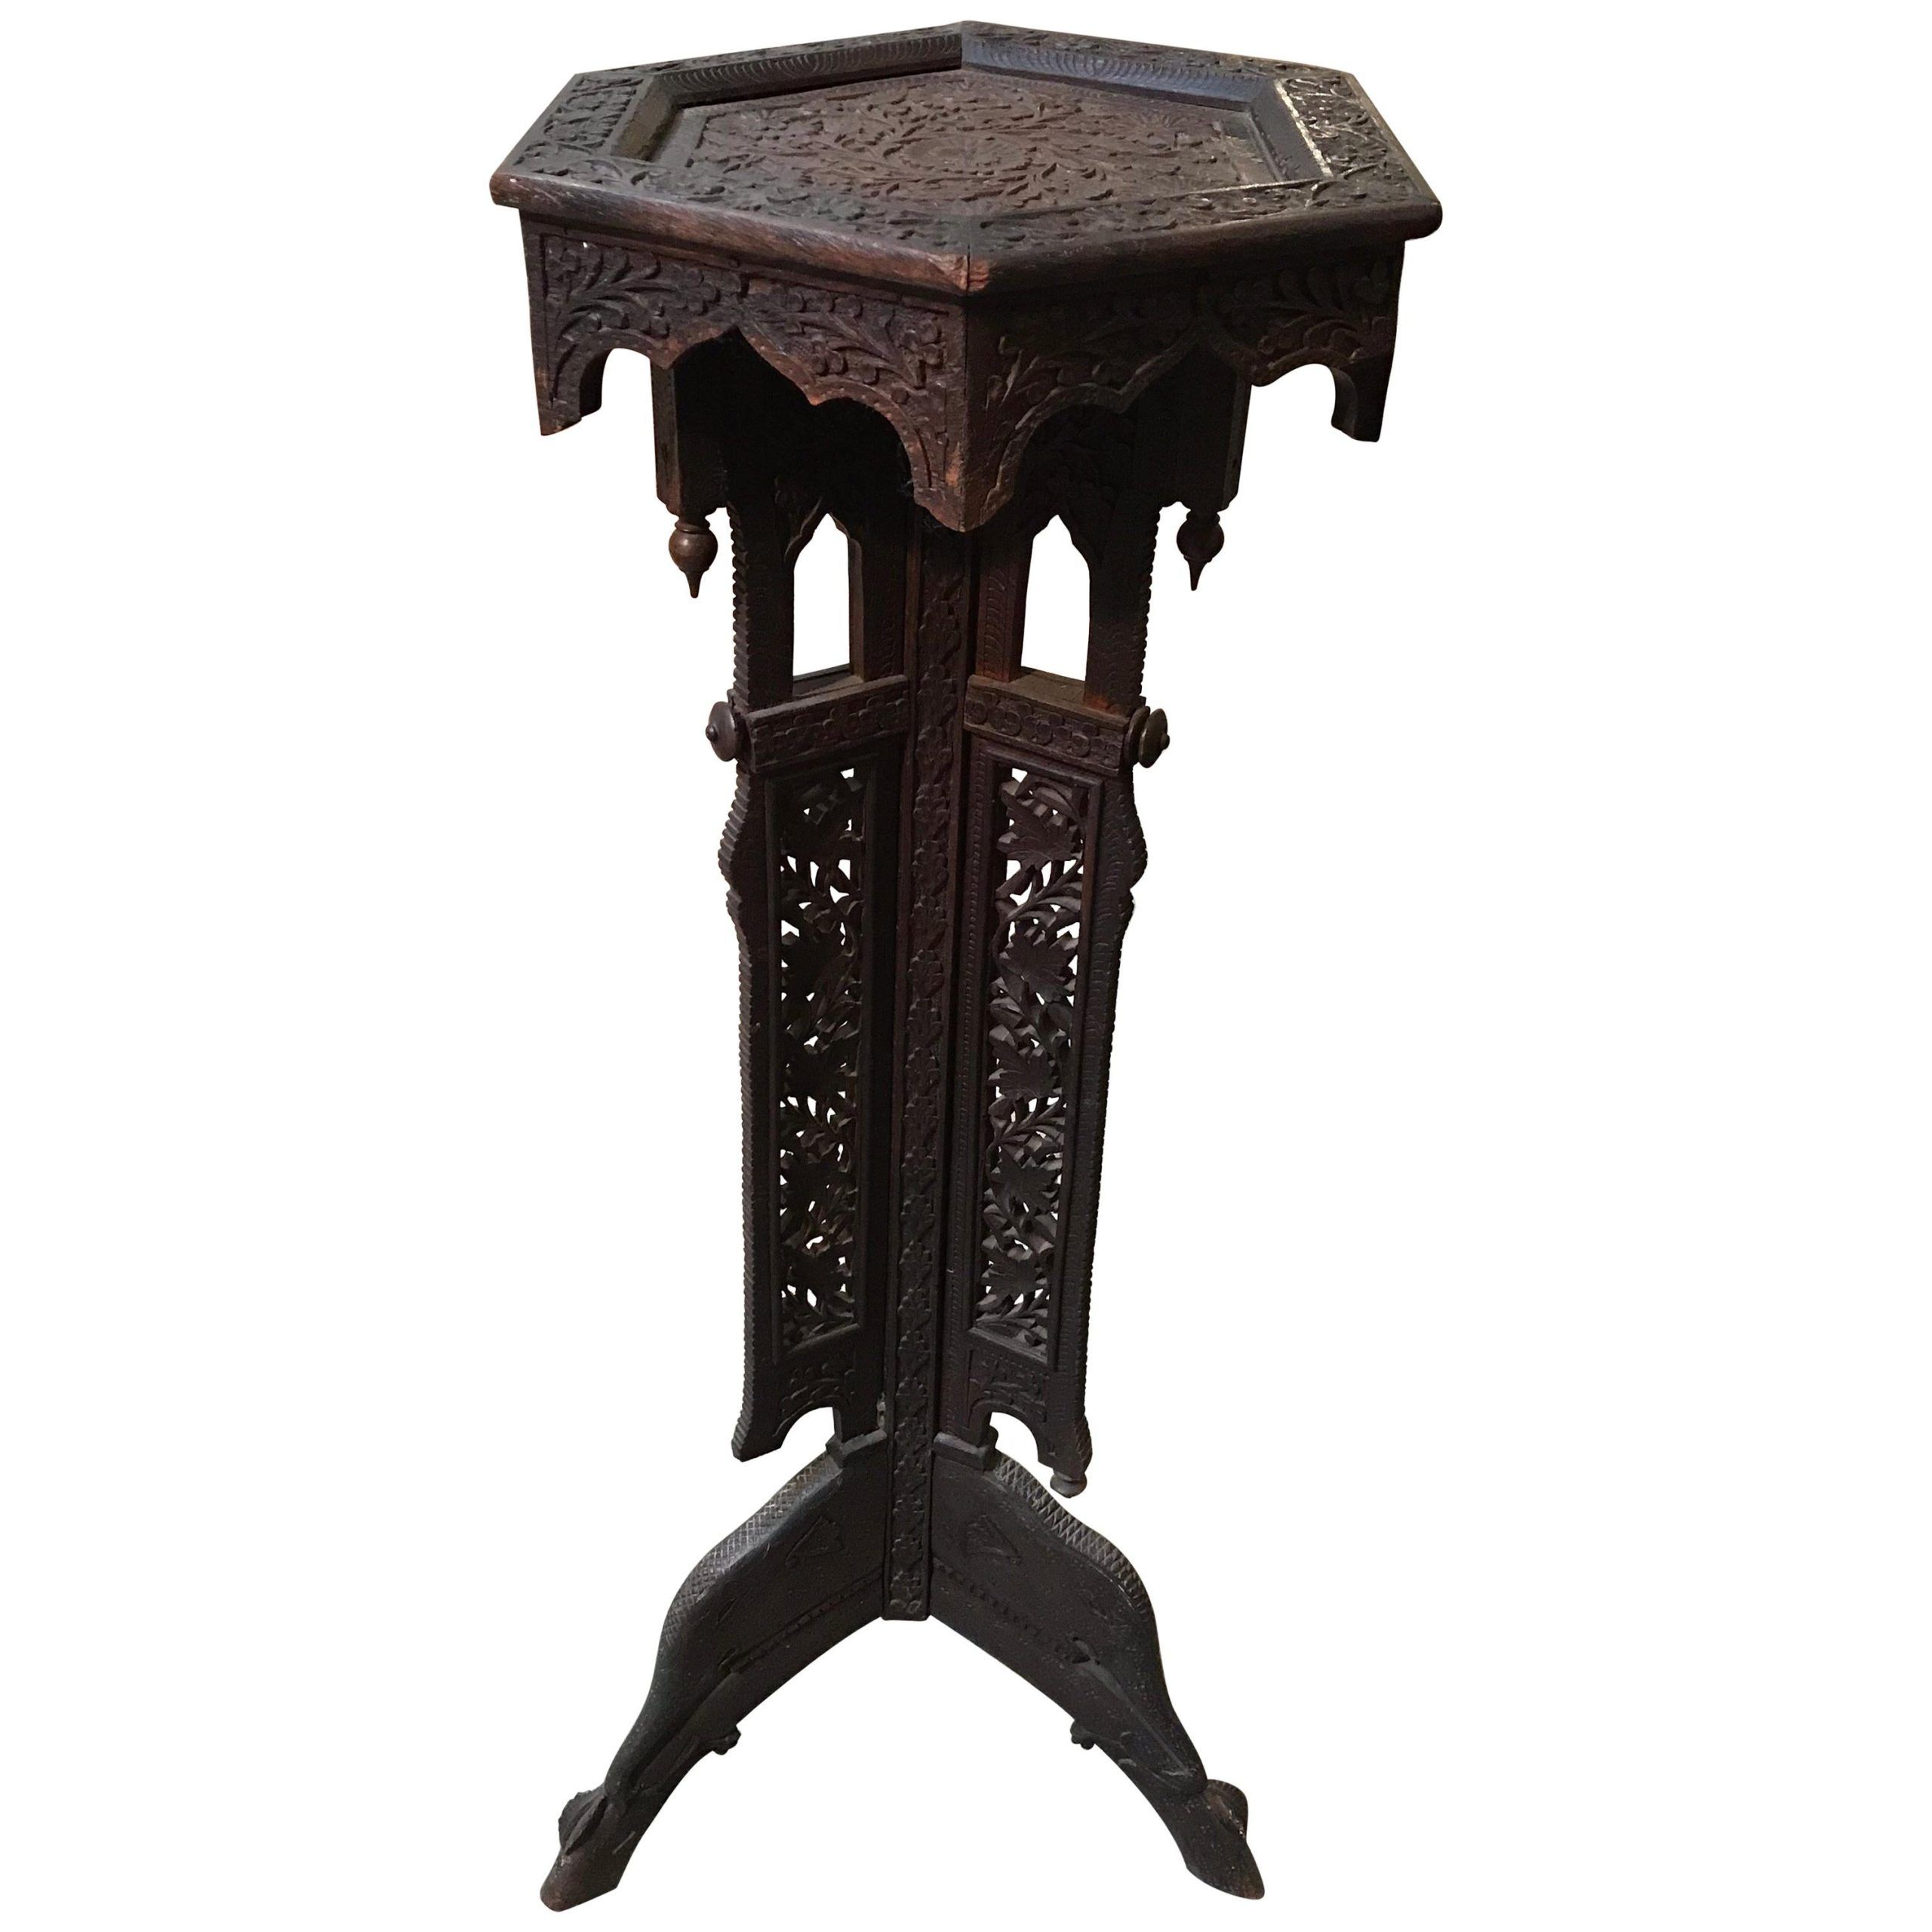 Carved Plant Stands Within Latest Carved Wooden Indian Plant Stand For Sale At 1stdibs (View 9 of 10)